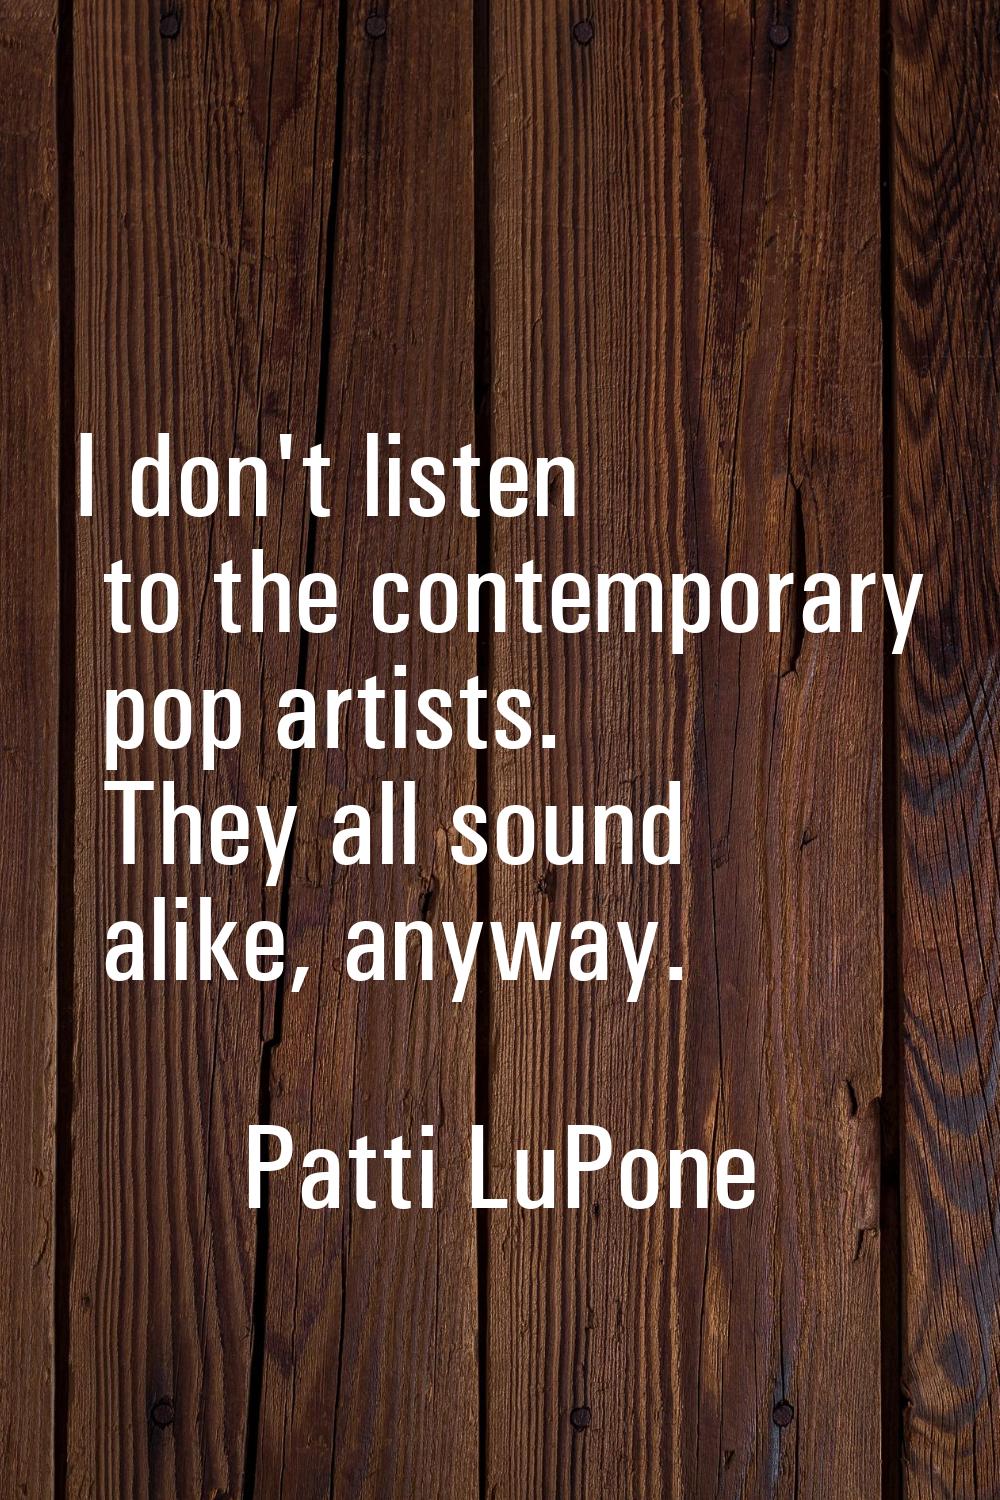 I don't listen to the contemporary pop artists. They all sound alike, anyway.